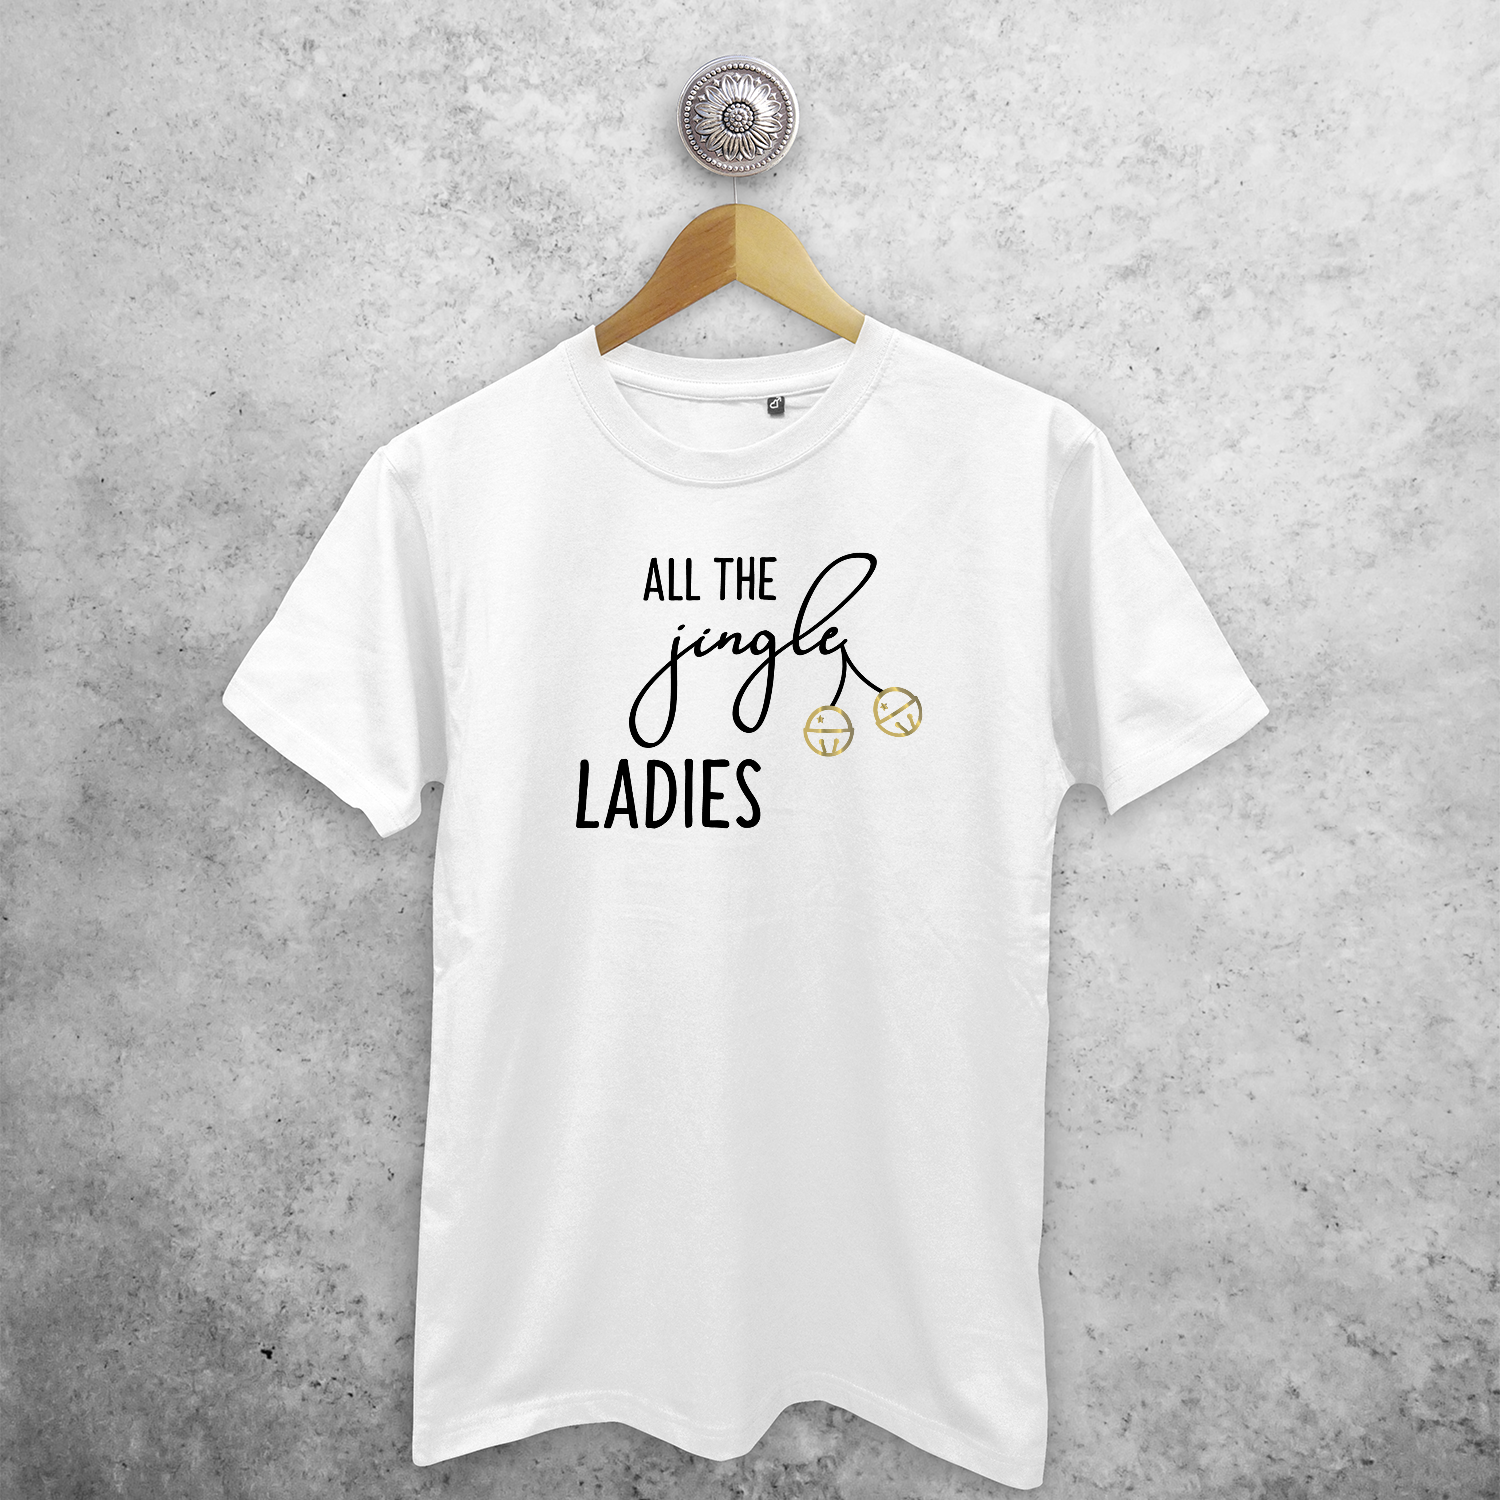 Adult shirt with short sleeves, with ‘All the jingle ladies’ print by KMLeon.